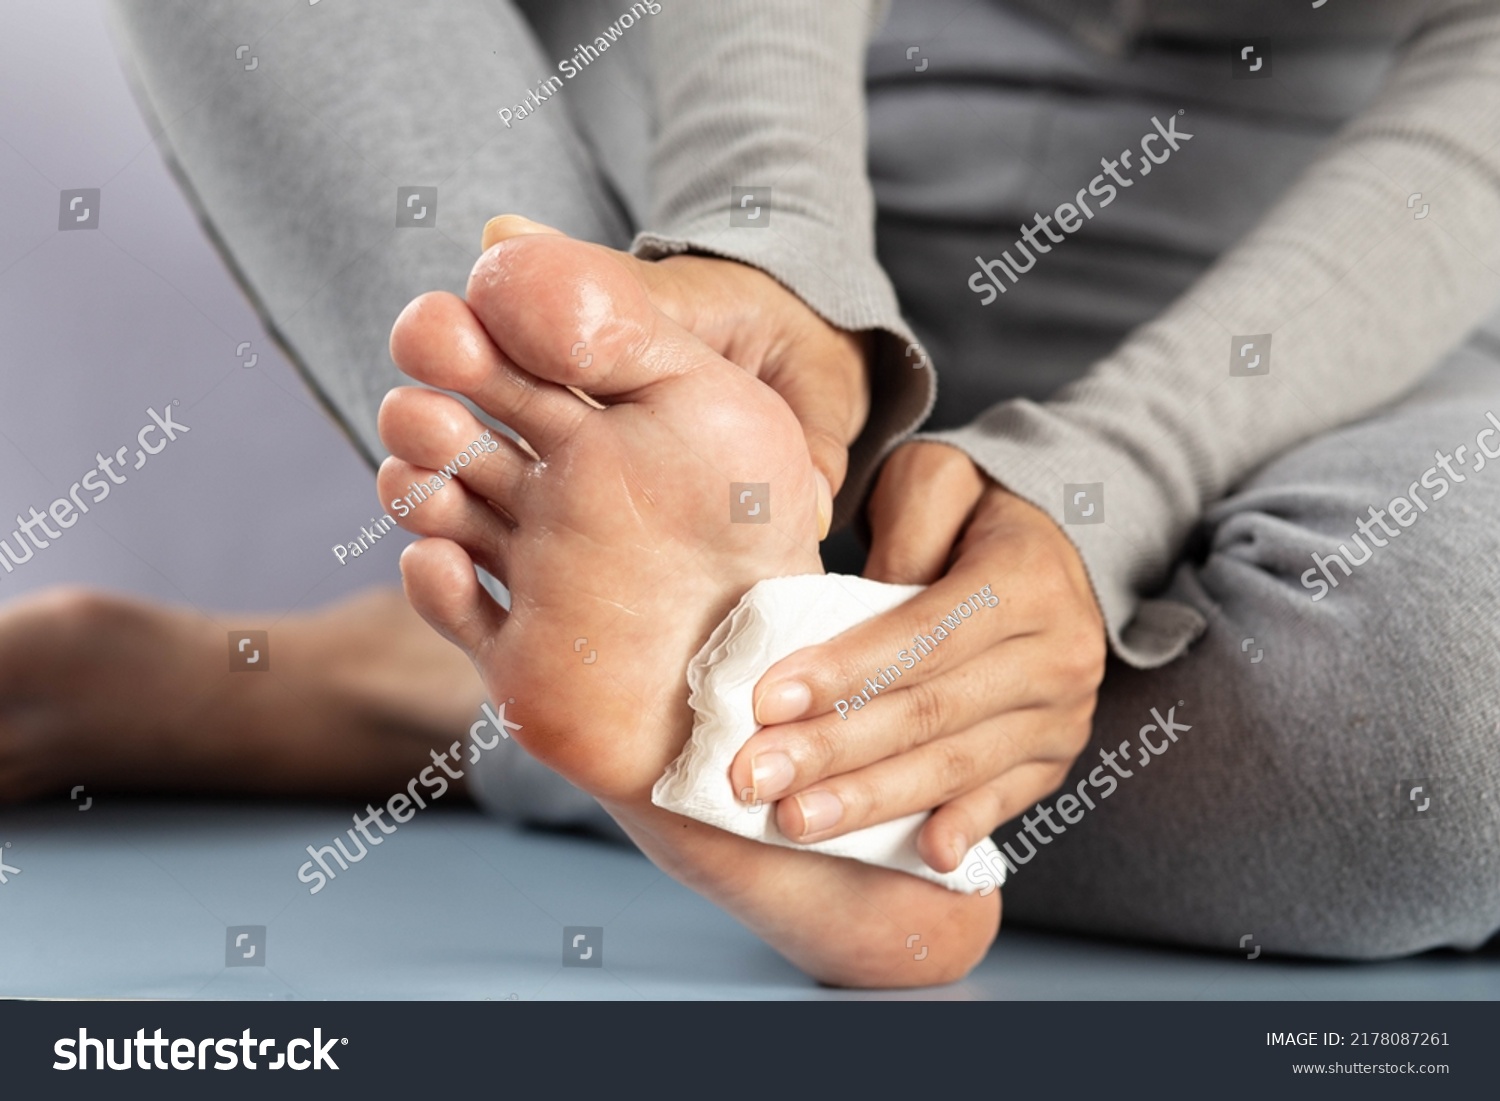 Hyperhidrosis, The woman wipes her feet after they have been excessively perspiring. #2178087261